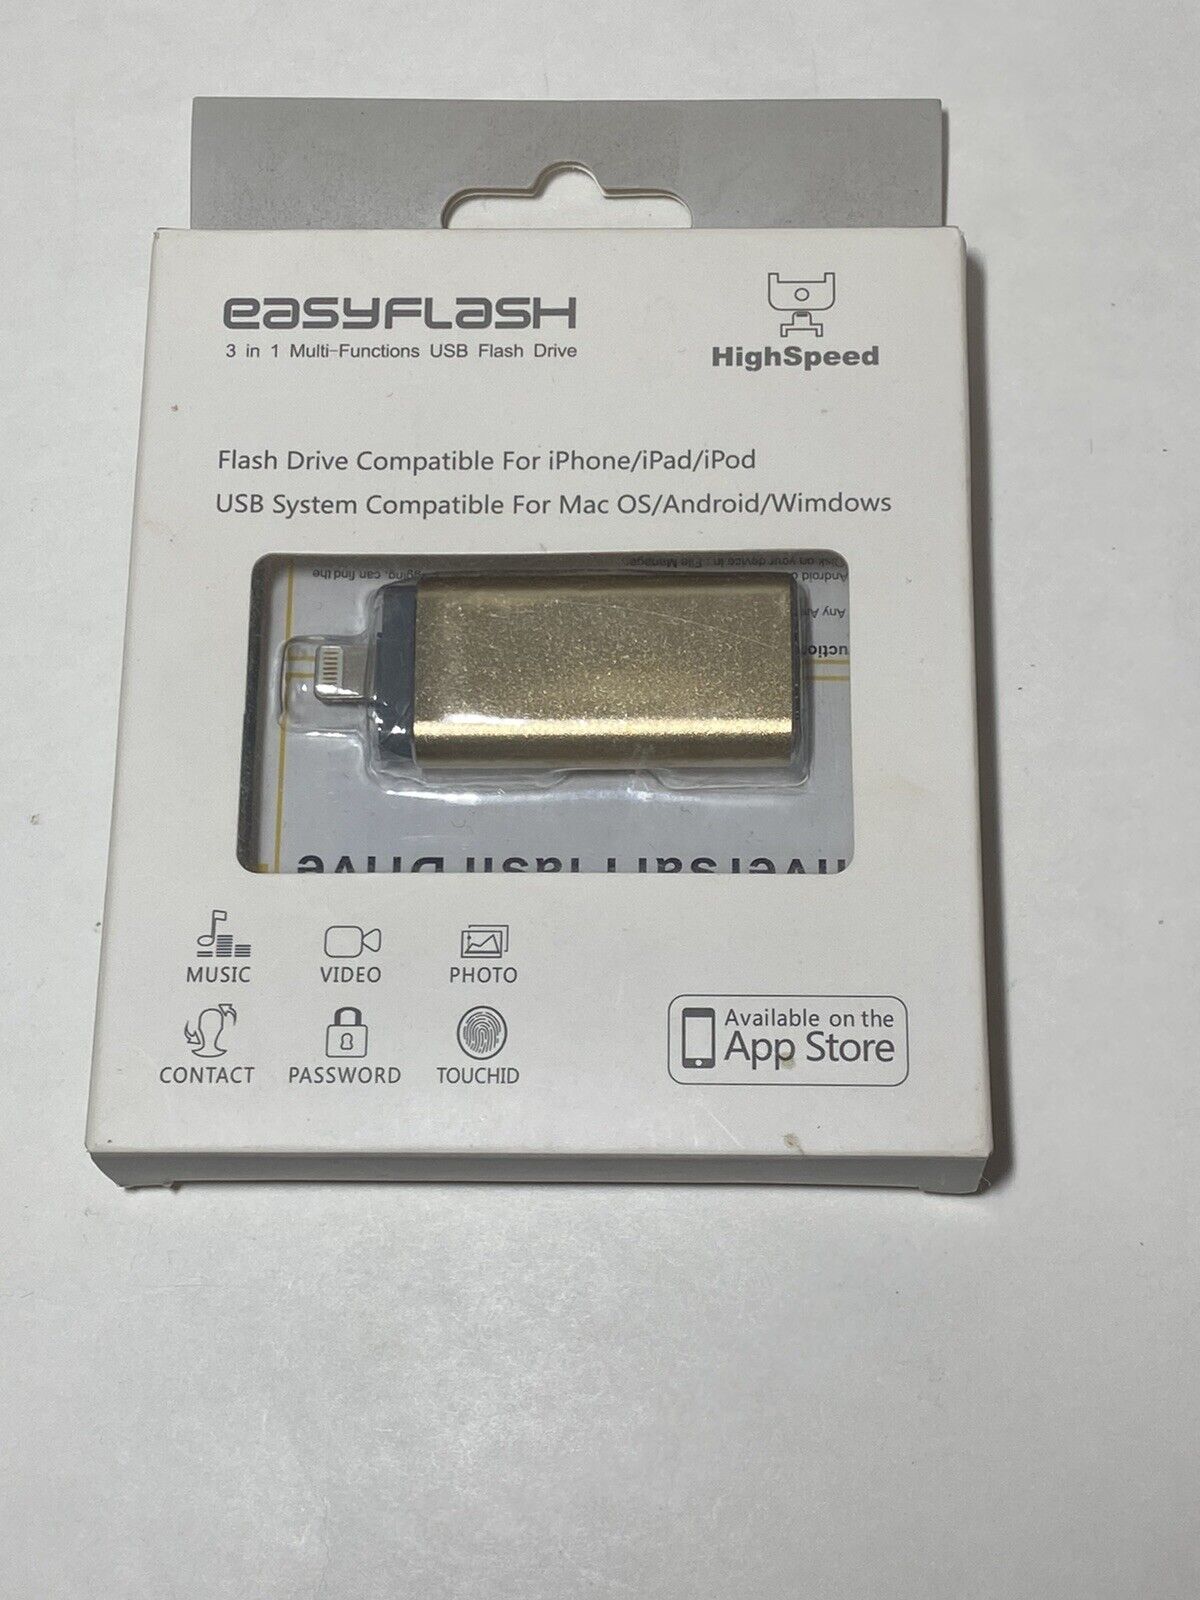 Easyflash - 3 in 1 Multi Function USB Flash Drive - Gold- Open Box